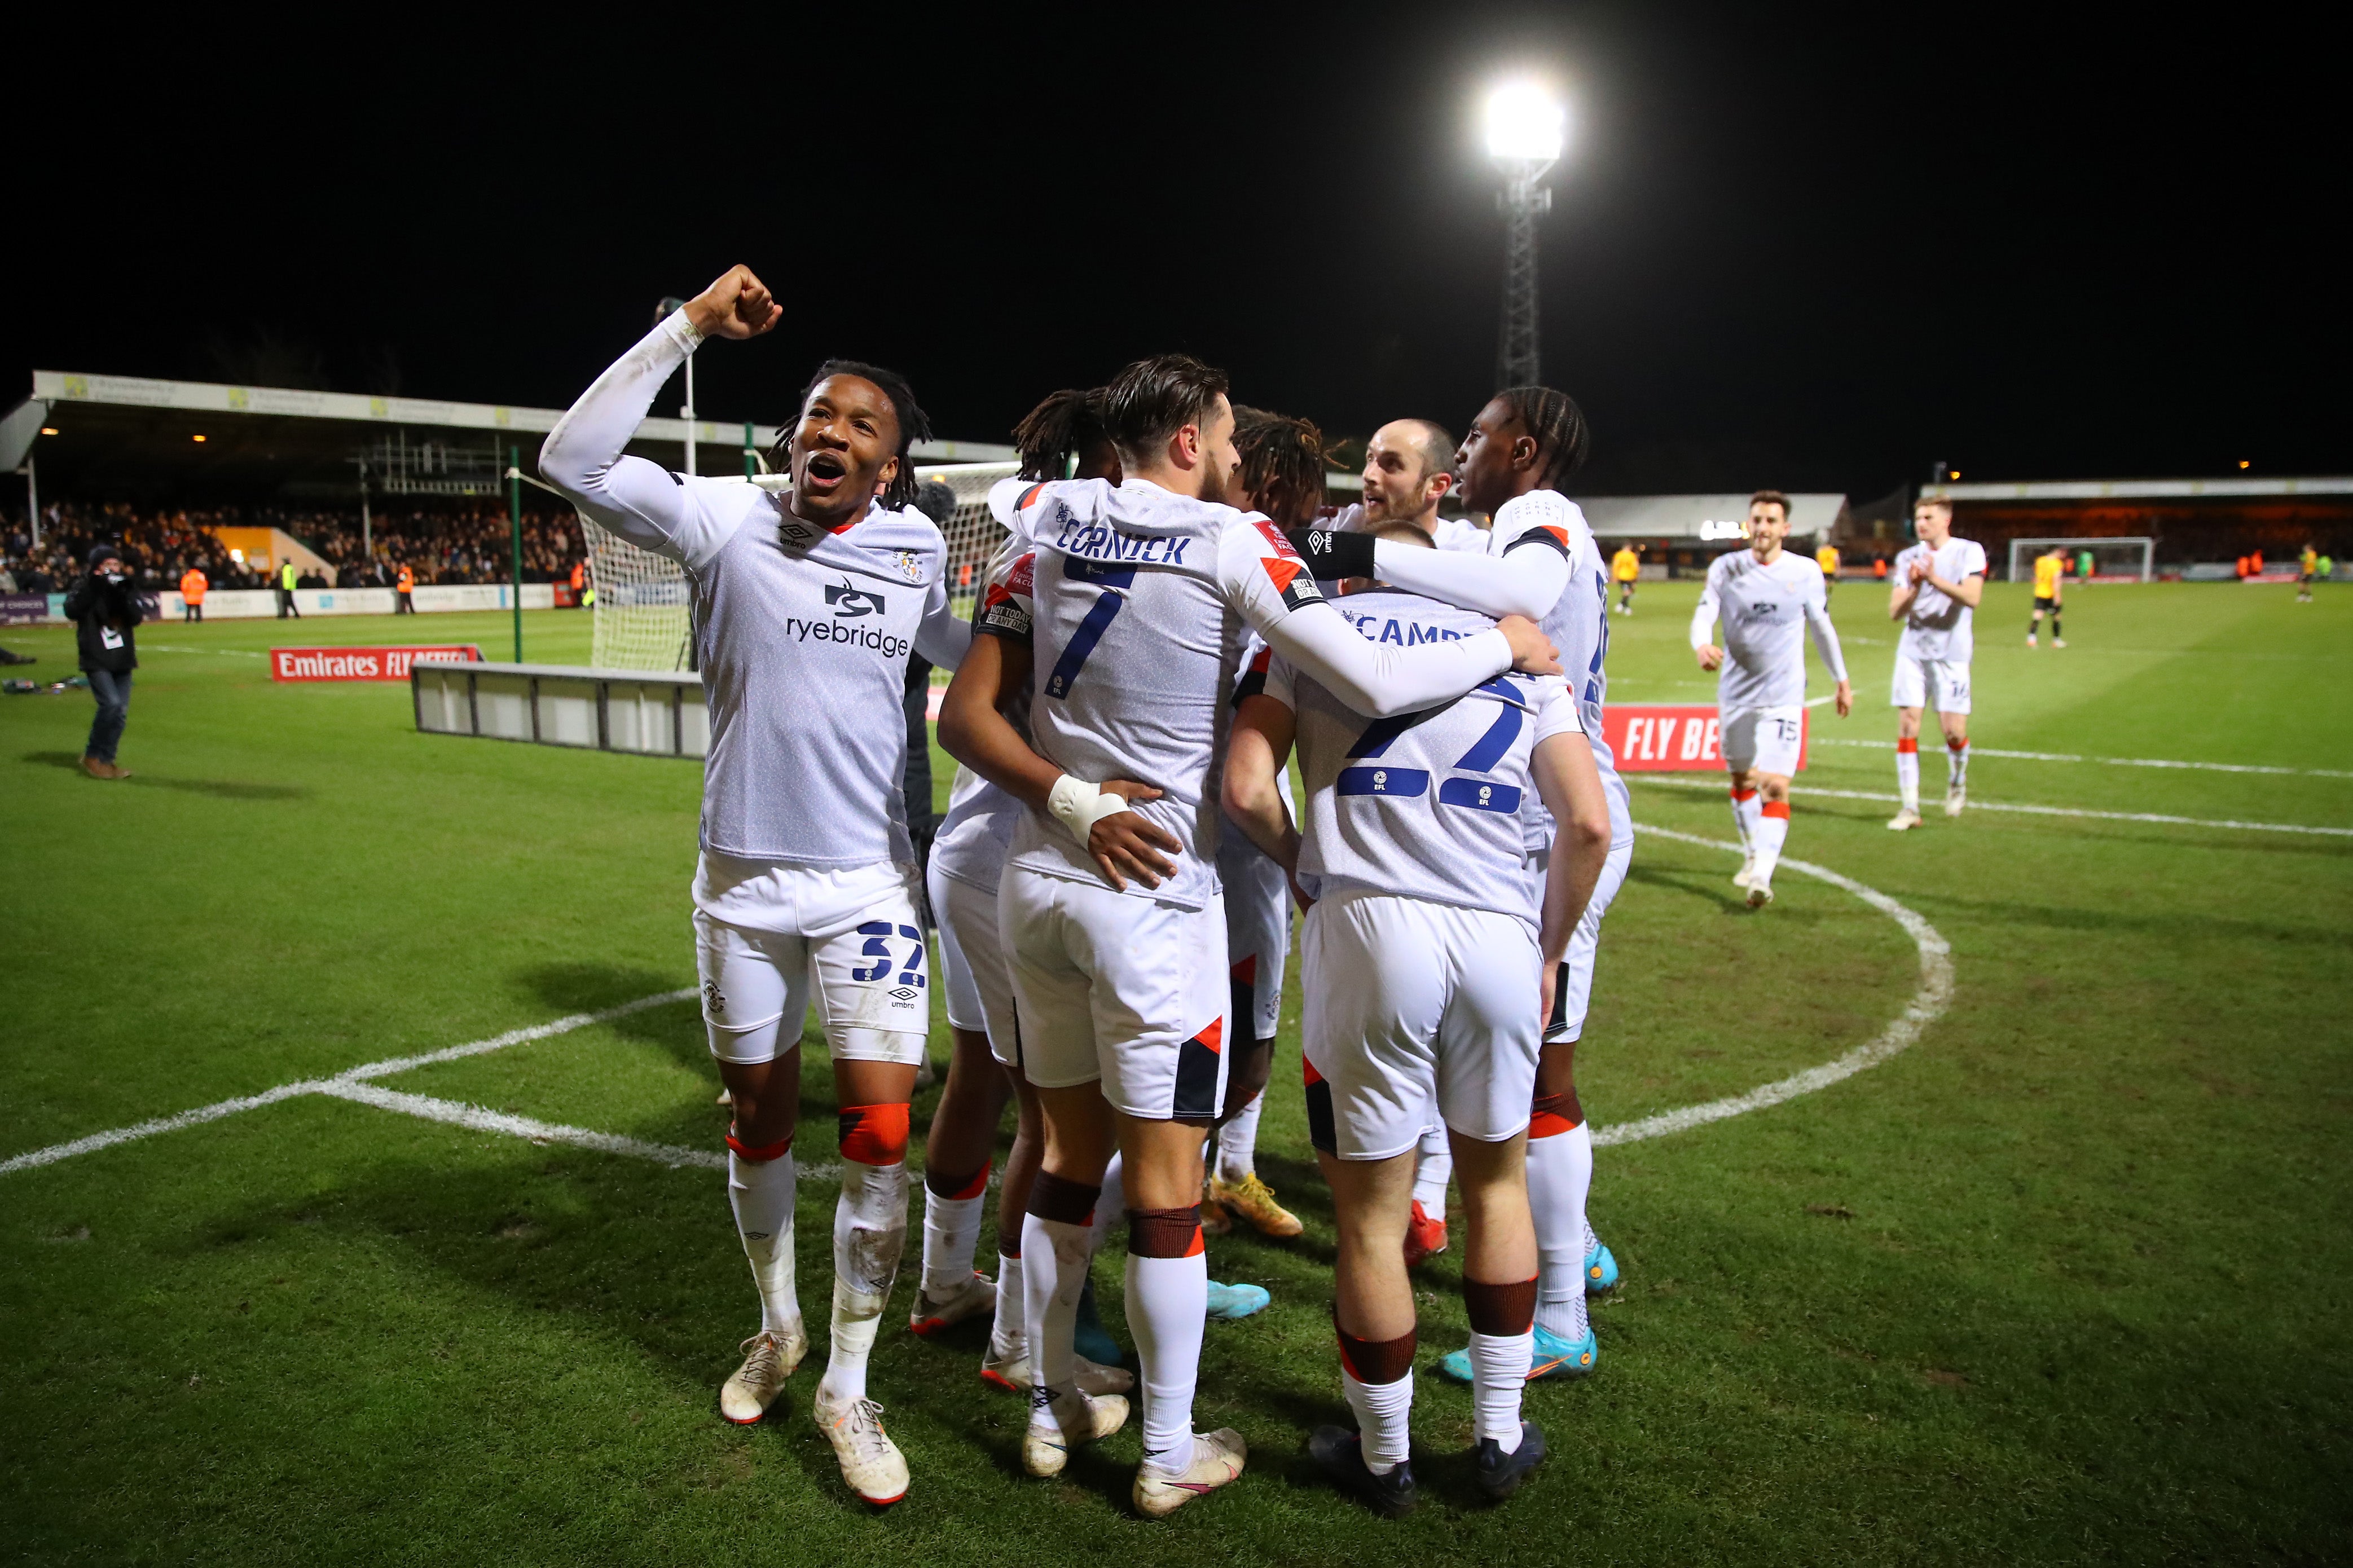 Luton Town celebrate after defeating Cambridge United